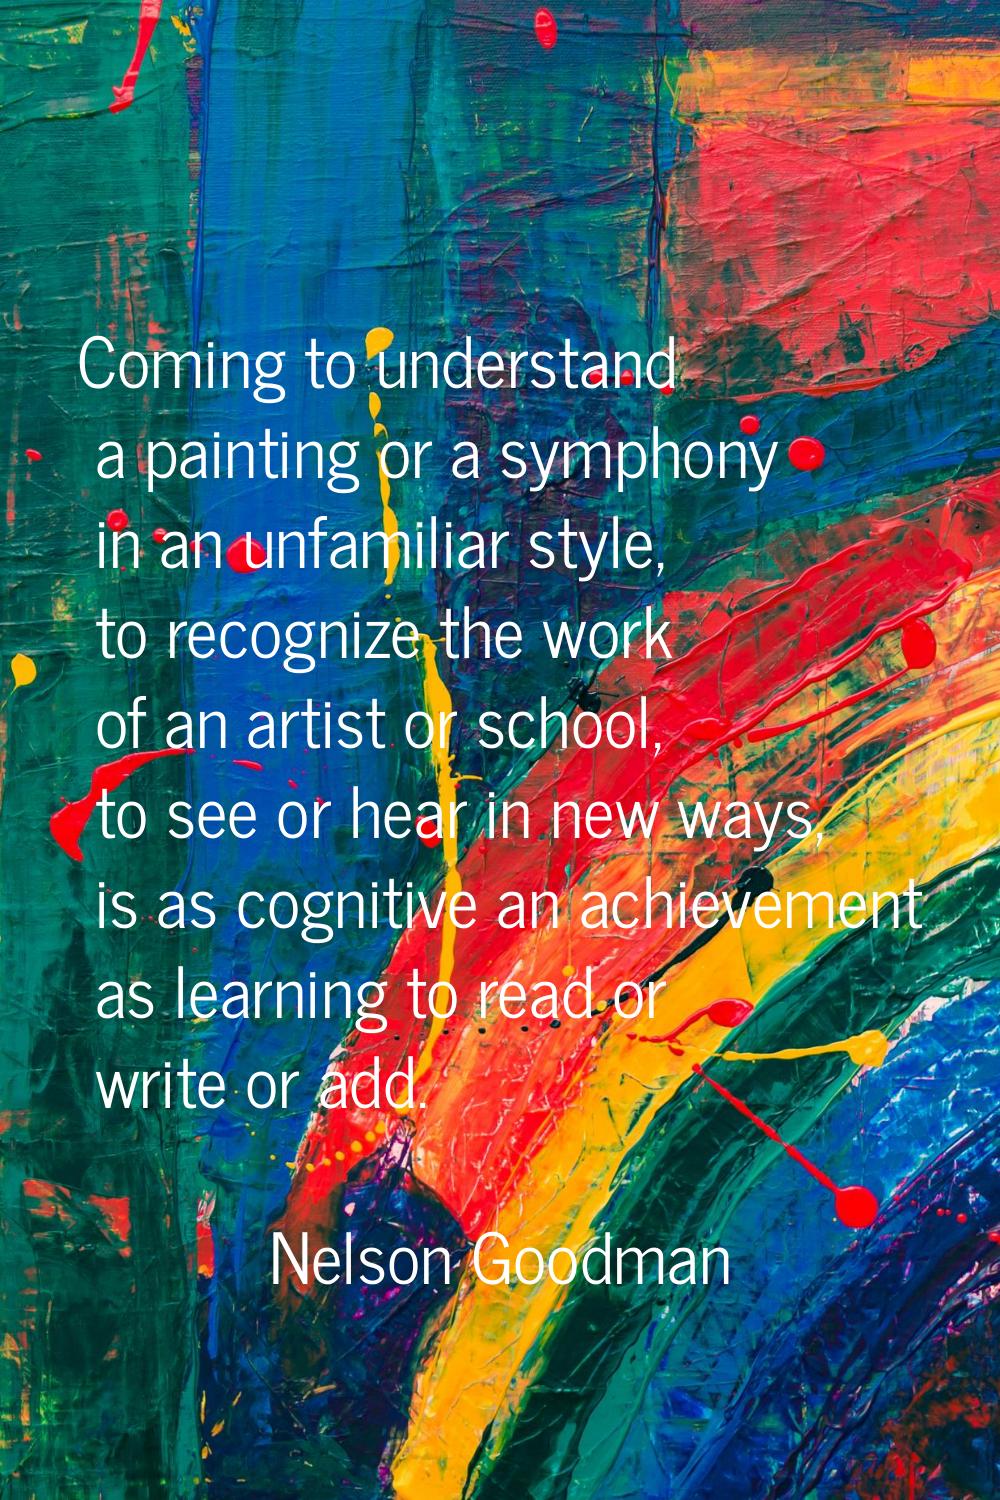 Coming to understand a painting or a symphony in an unfamiliar style, to recognize the work of an a